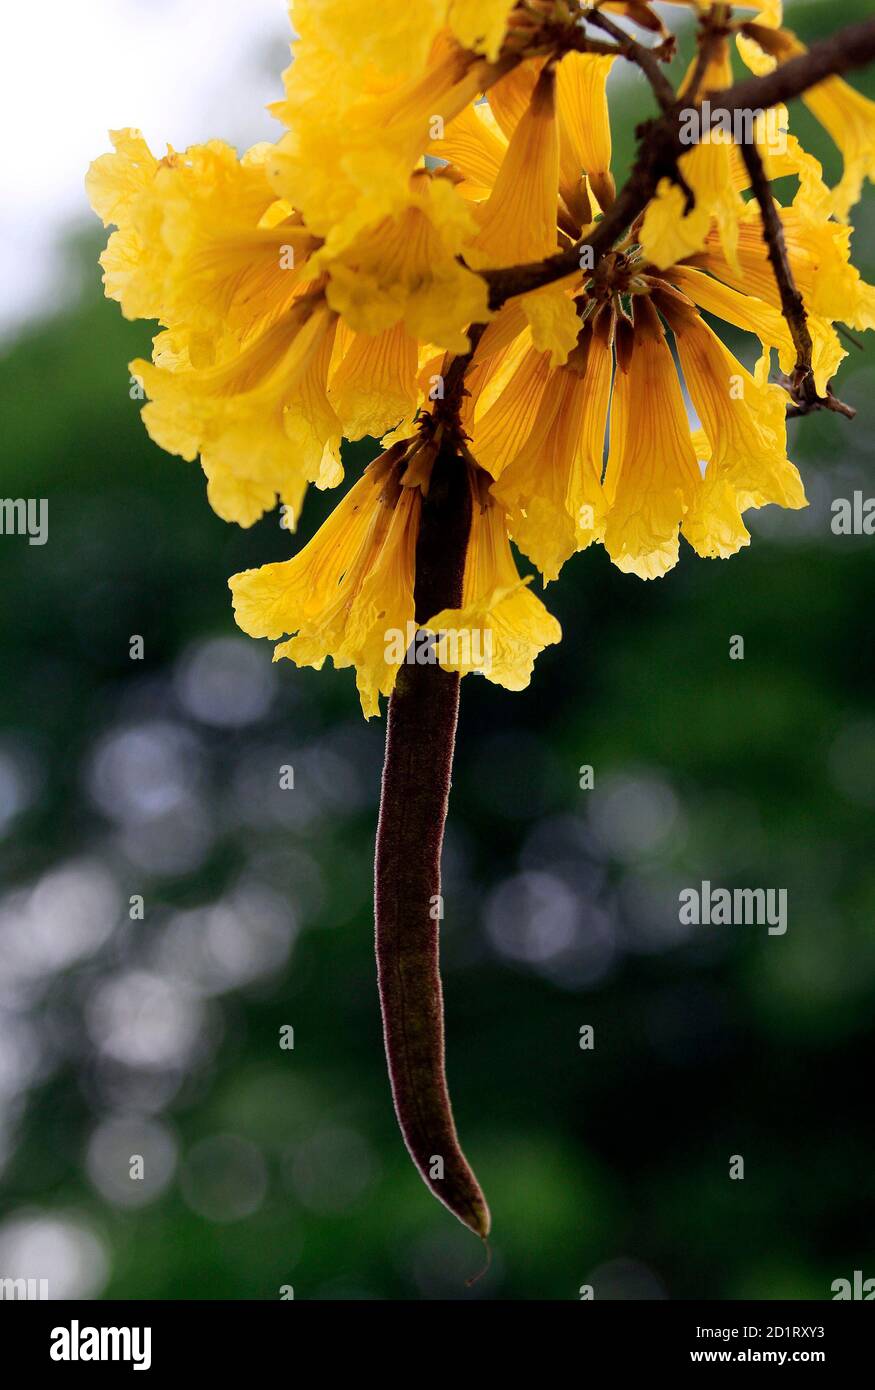 A seed pod hangs from a blooming yellow lapacho tree in a residential neighborhood of Asuncion, September 16, 2009. The lapacho tree, known as the Paraguayan national tree by its Guarani name, tajy, bloomed full this year in its less common yellow variety.  REUTERS/Jorge Adorno  (PARAGUAY ENVIRONMENT SOCIETY) Stock Photo